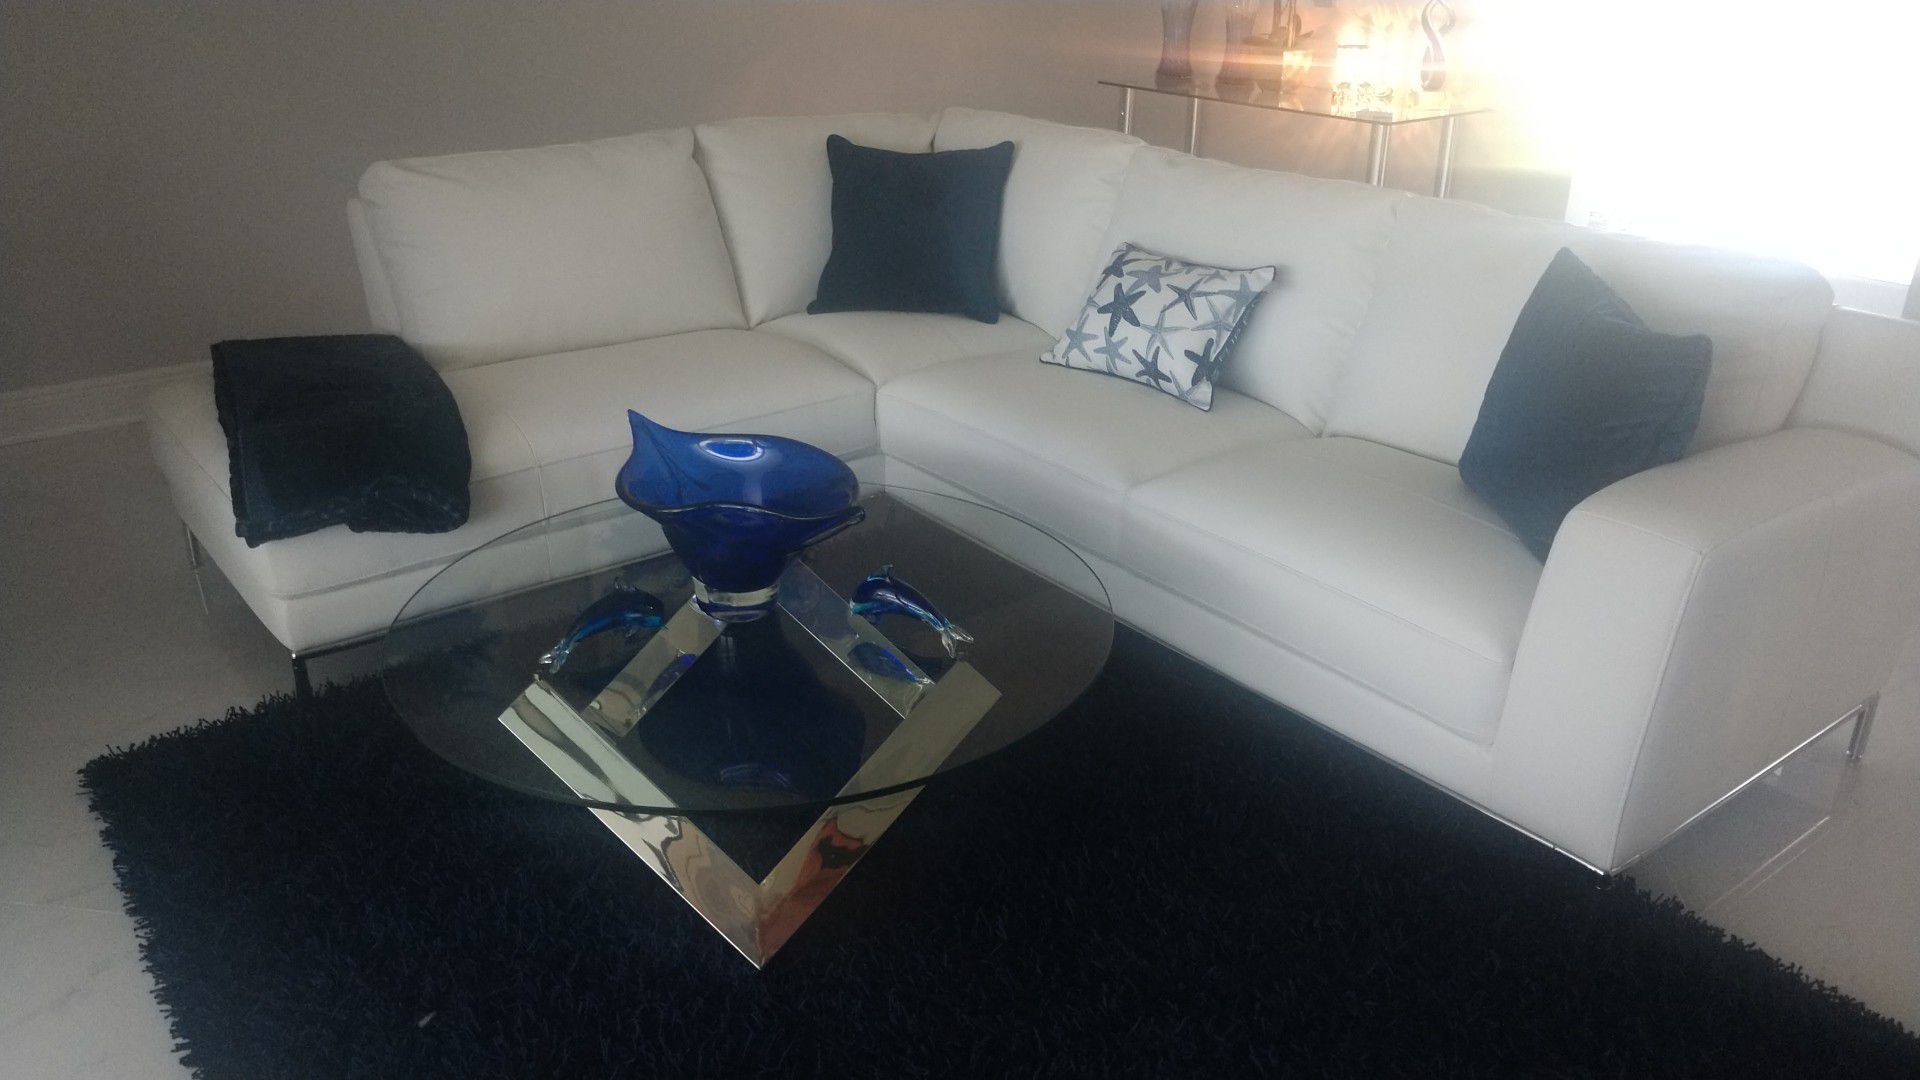 White leather secataniol couch( serious offers only)